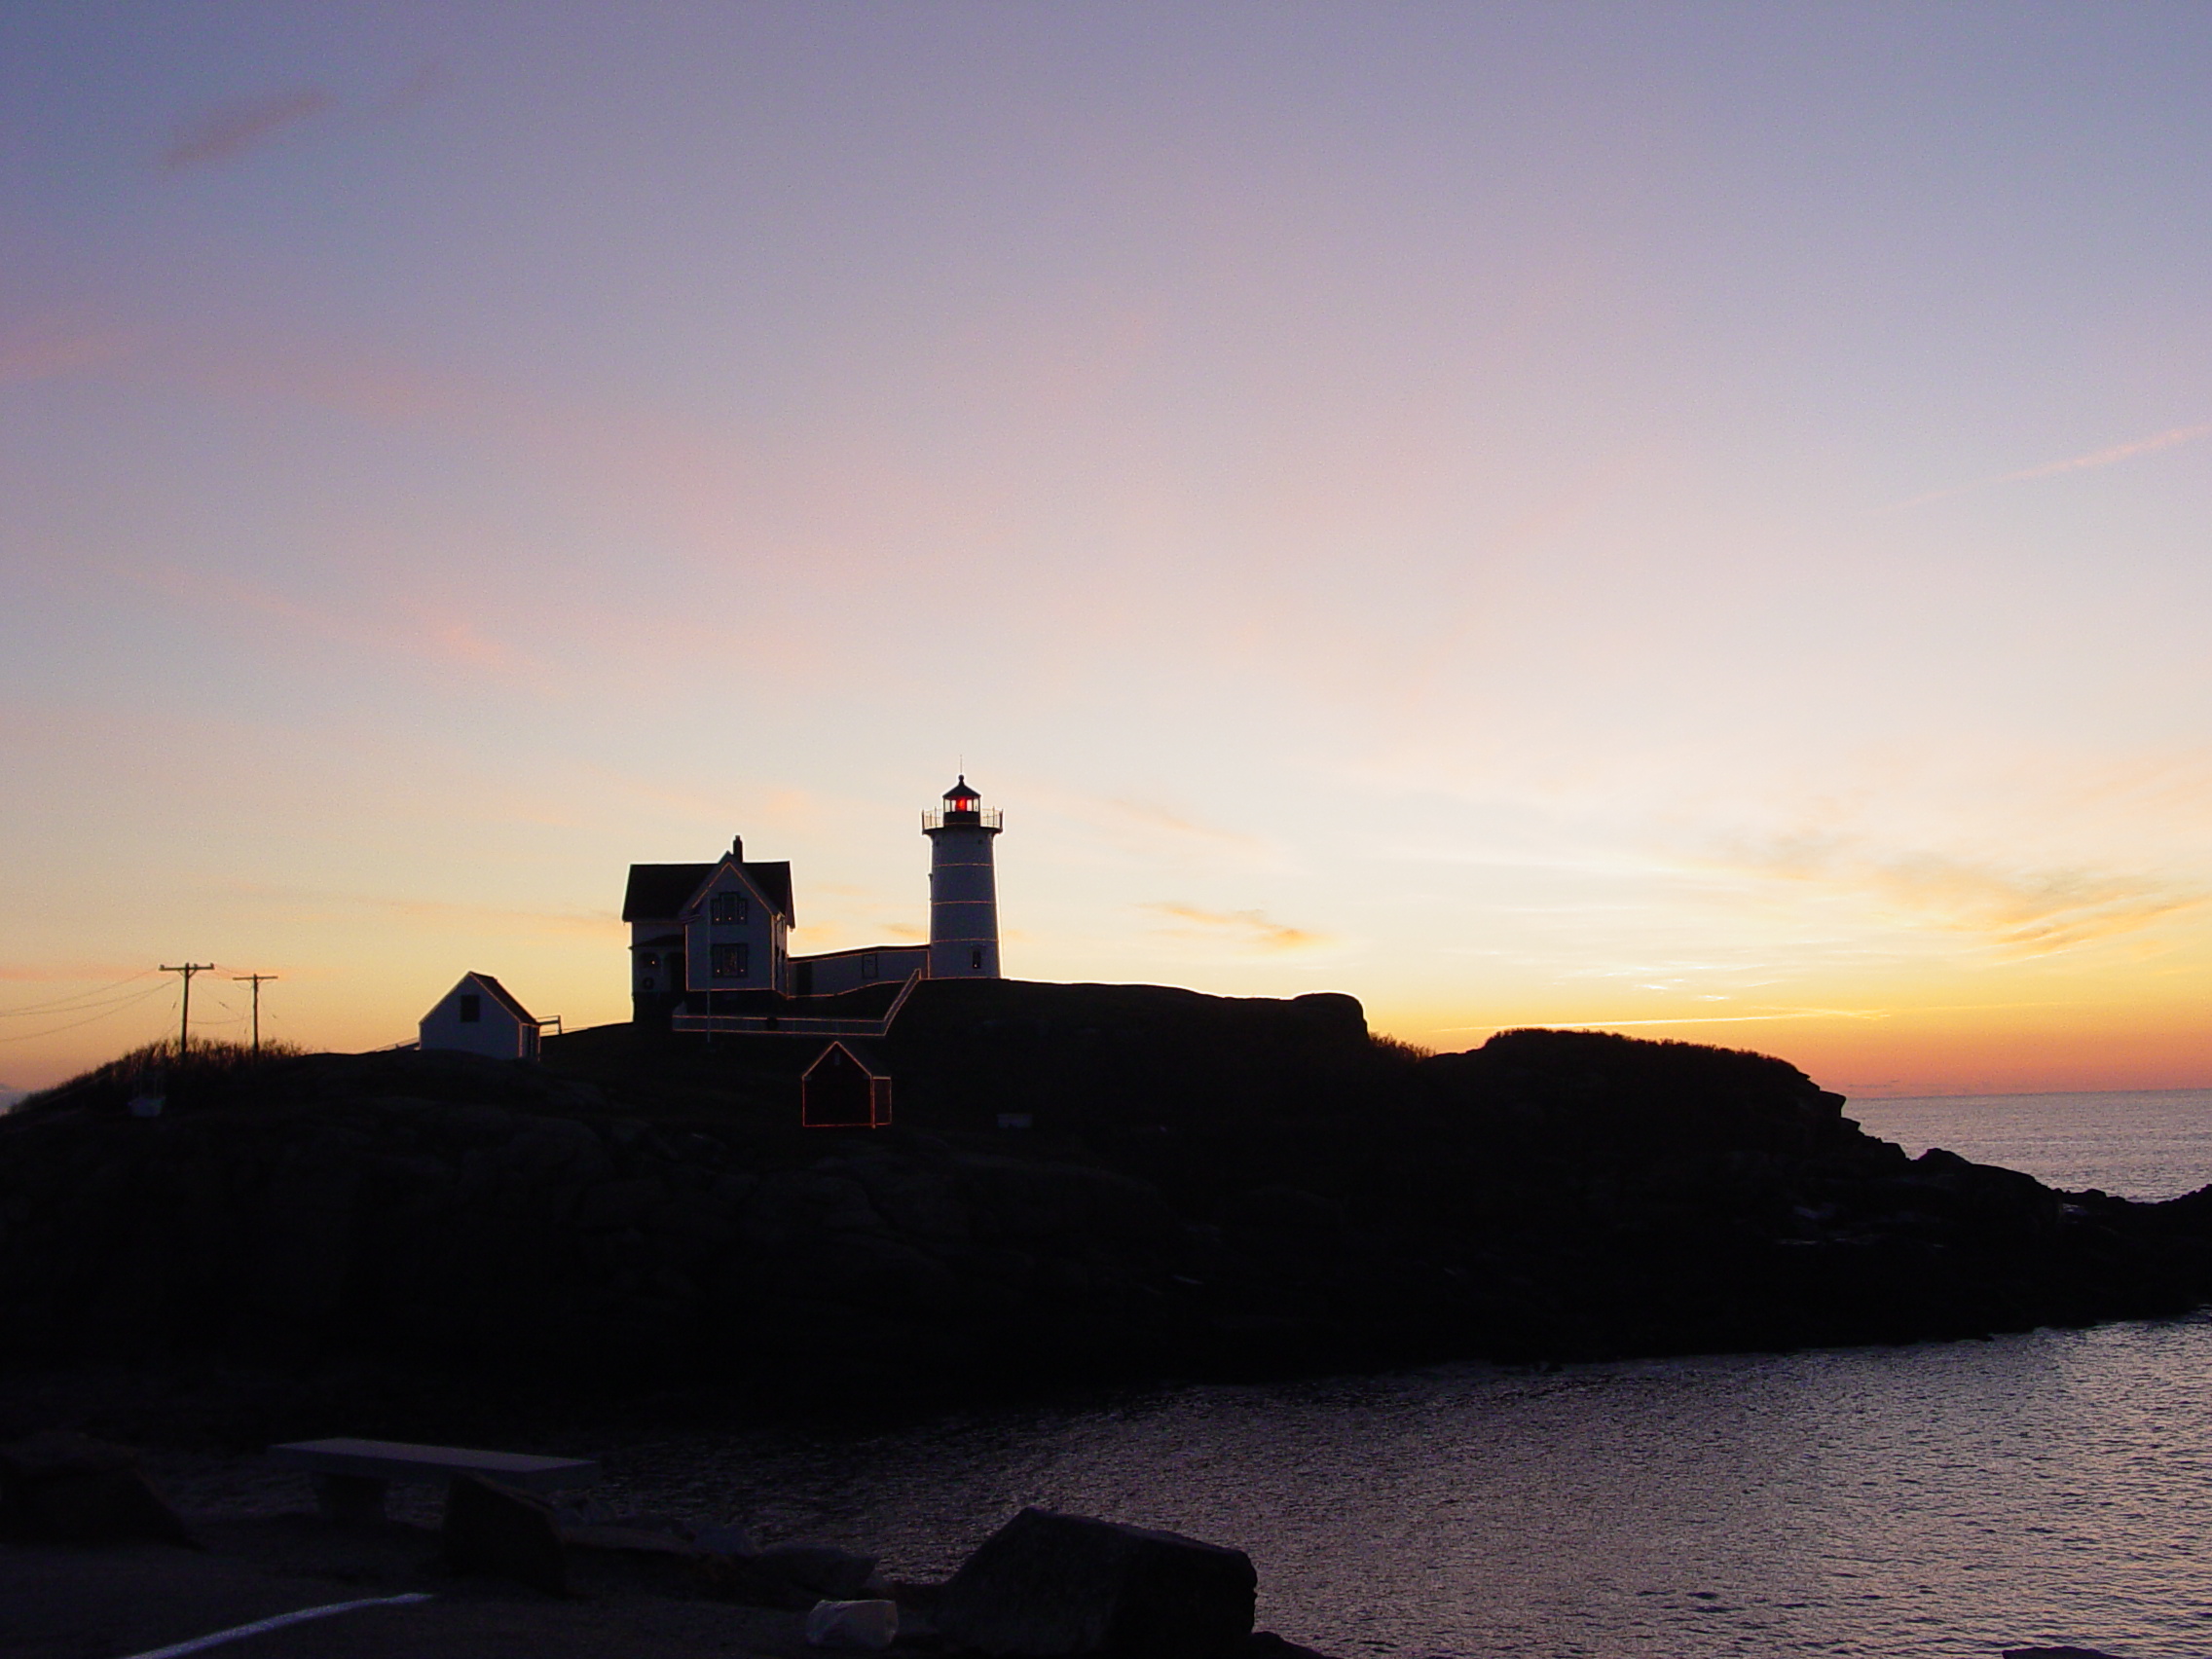 Sunrise At Nubble Light (user submitted)